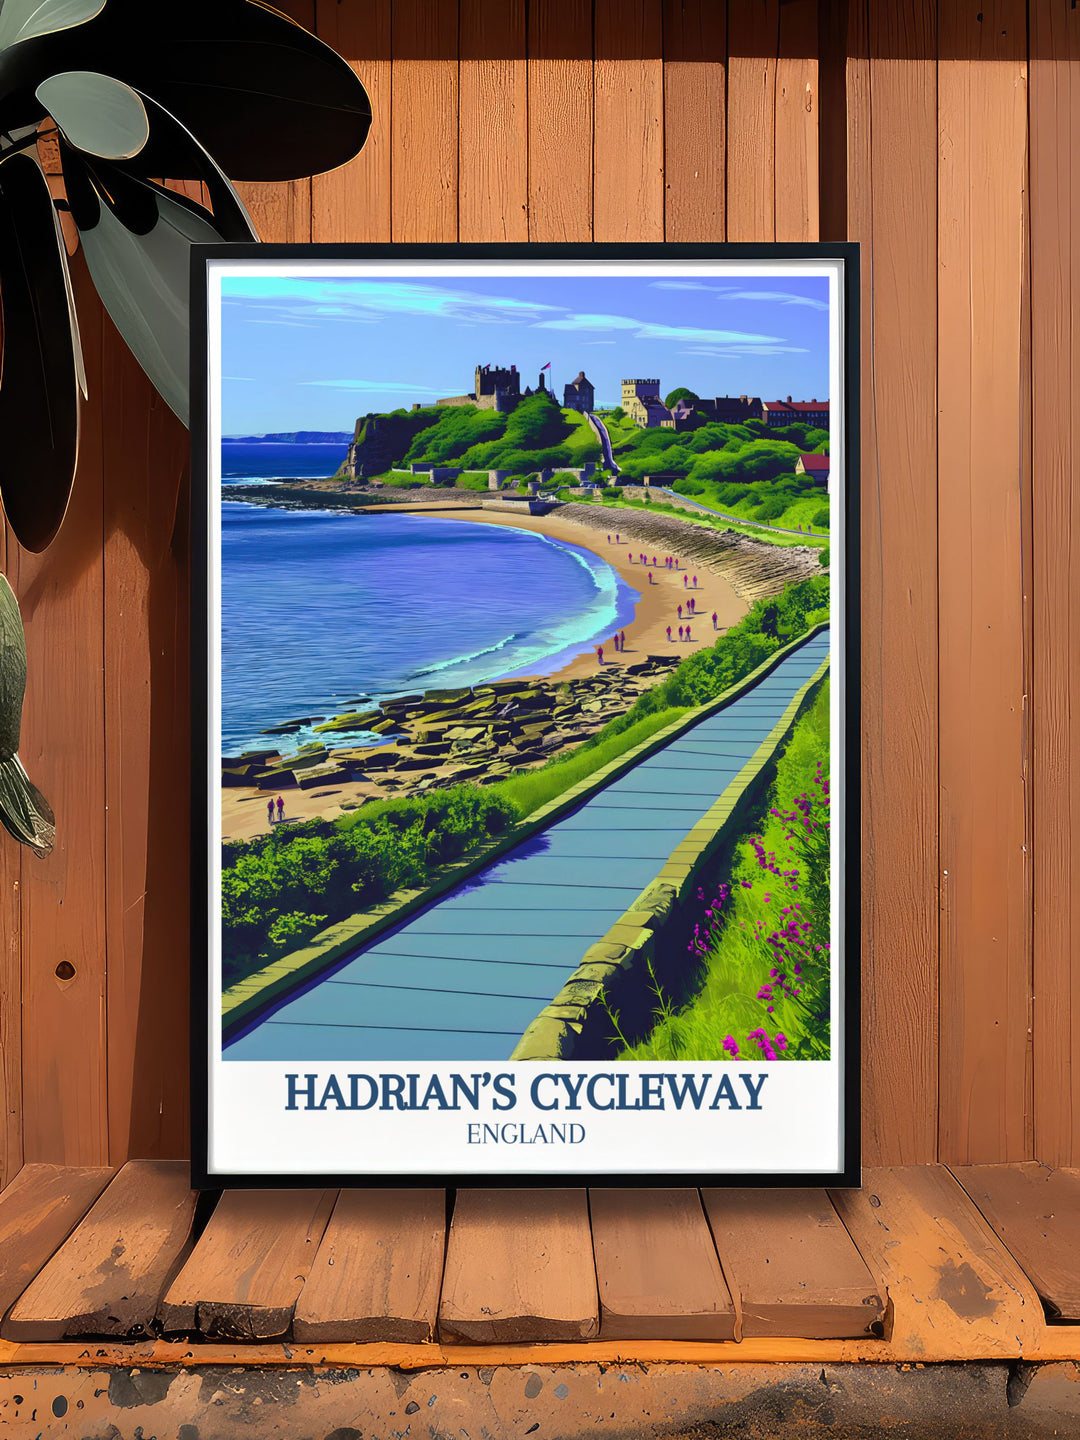 Showcasing the iconic Hadrians Wall and the scenic beauty of the North Sea, this travel poster invites you to explore the rich history and natural landscapes of Northern England.